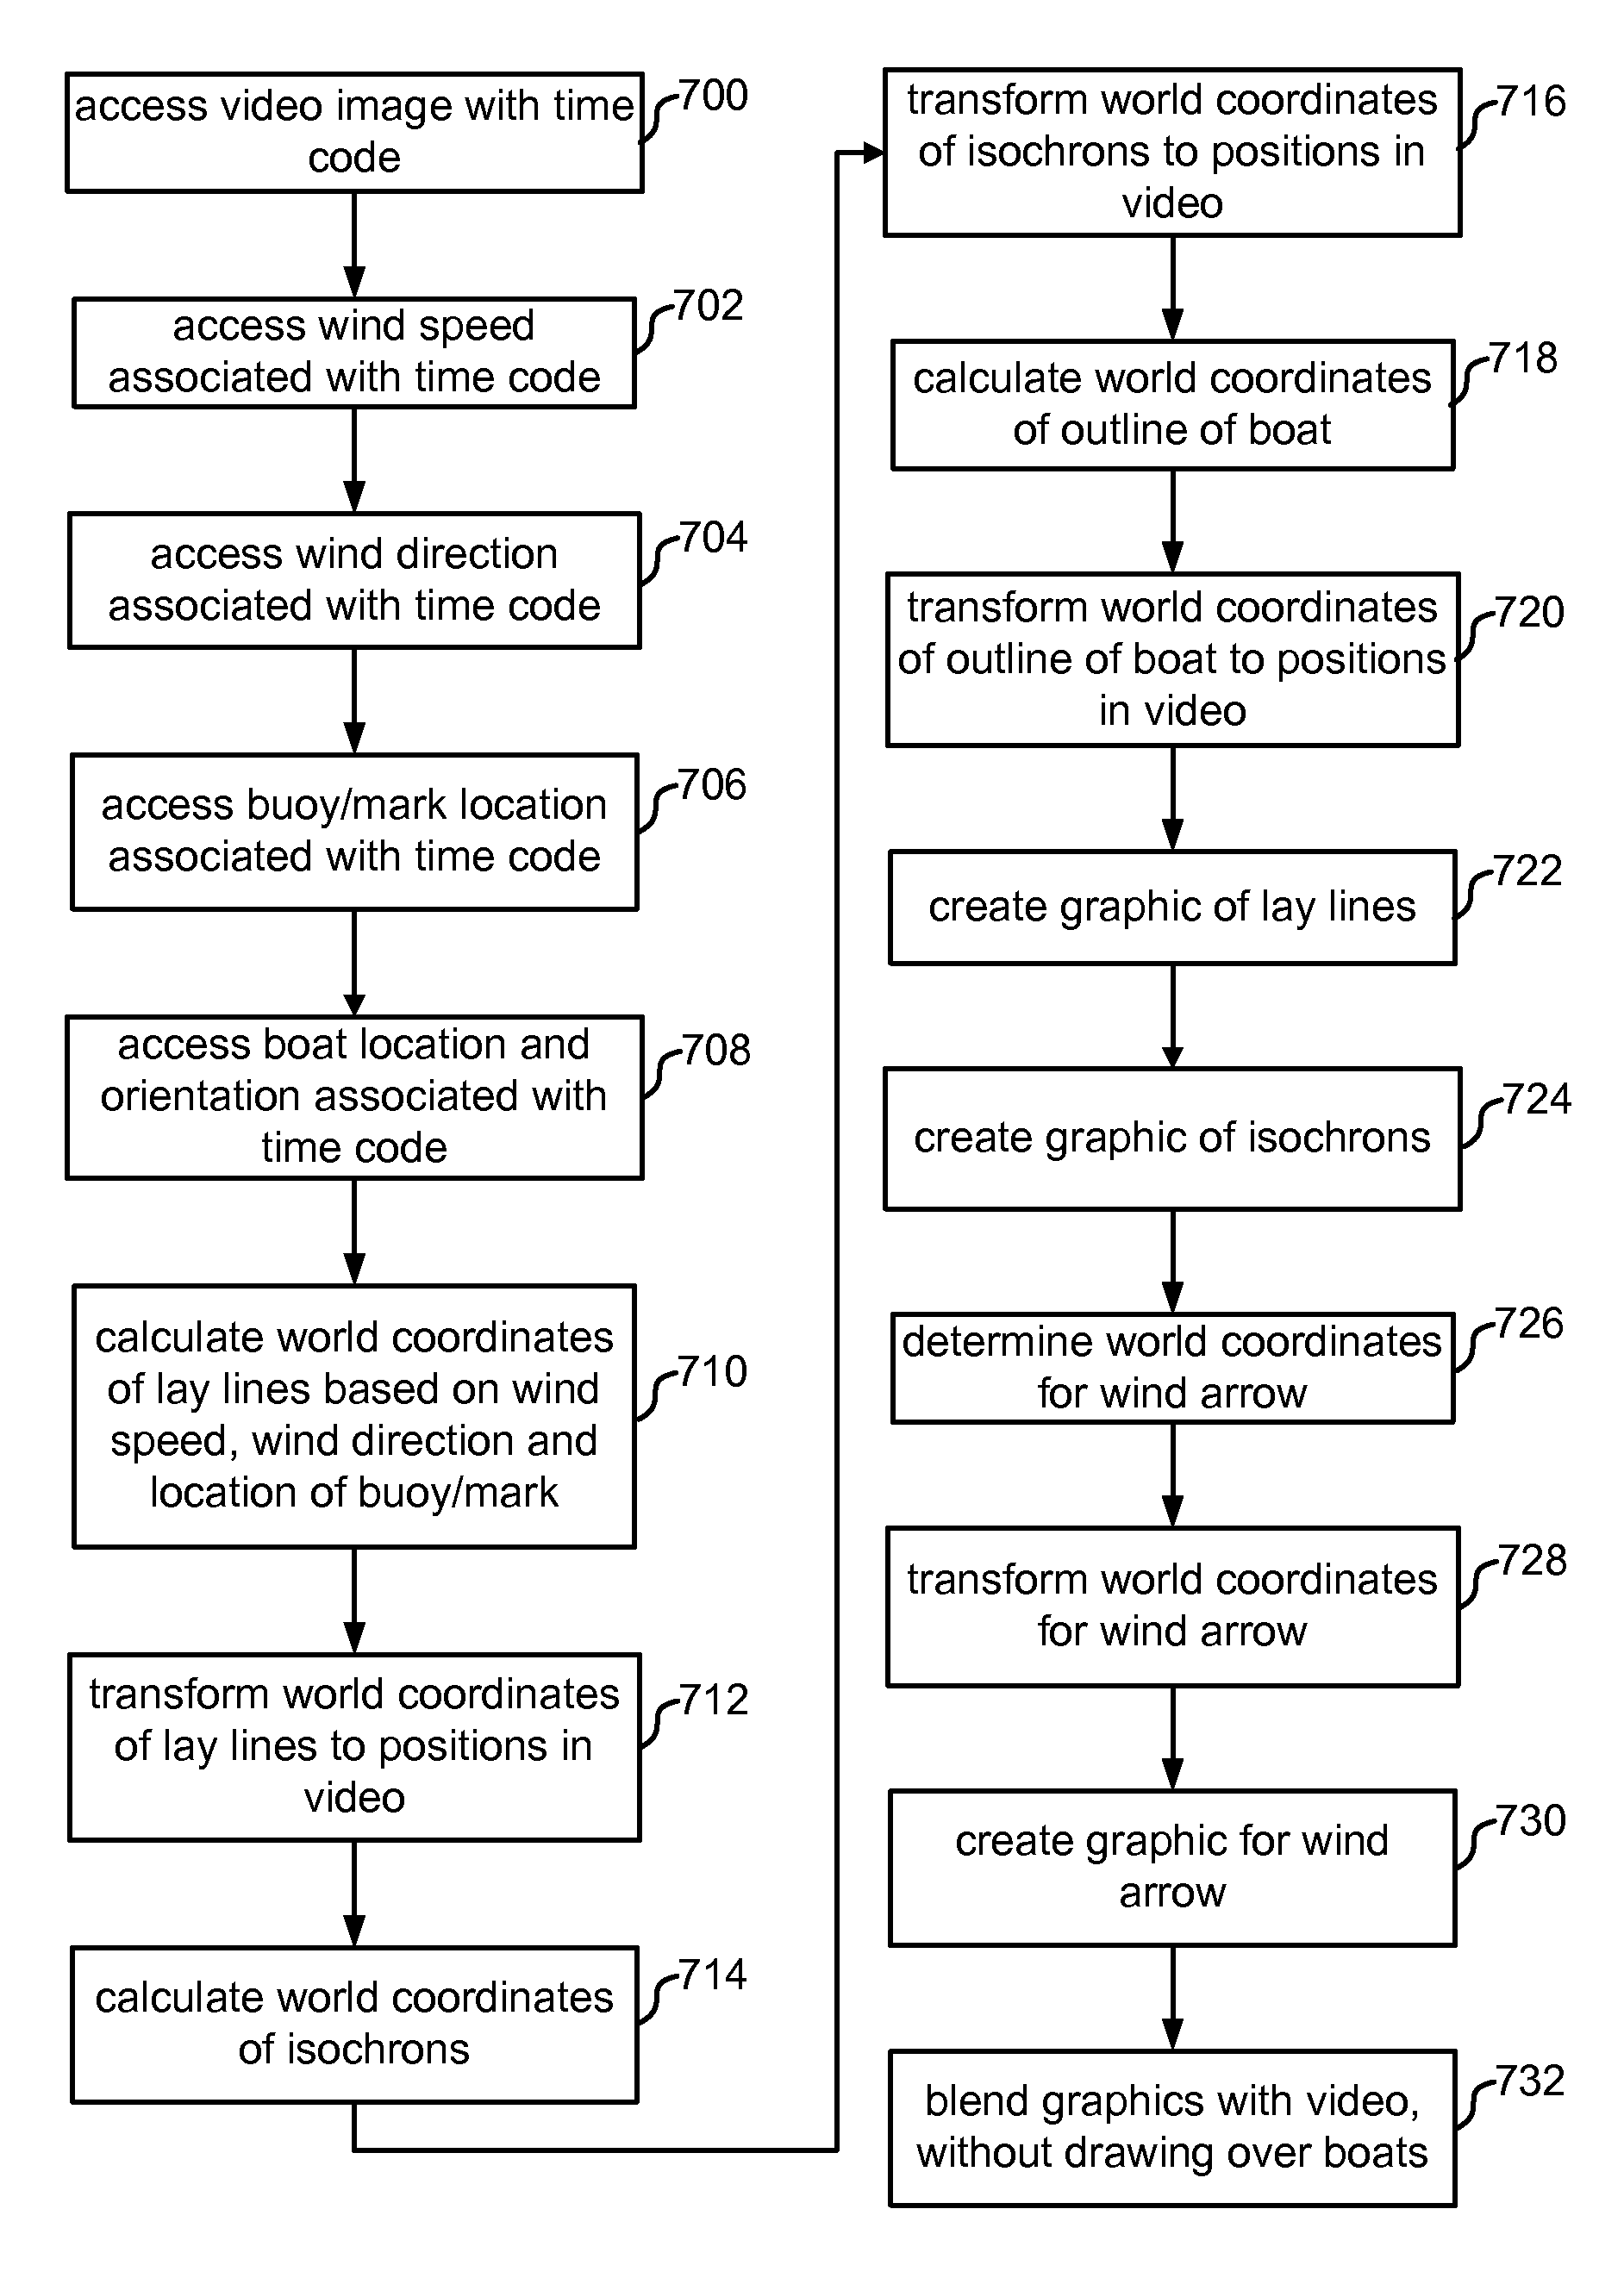 System for enhancing video from a mobile camera